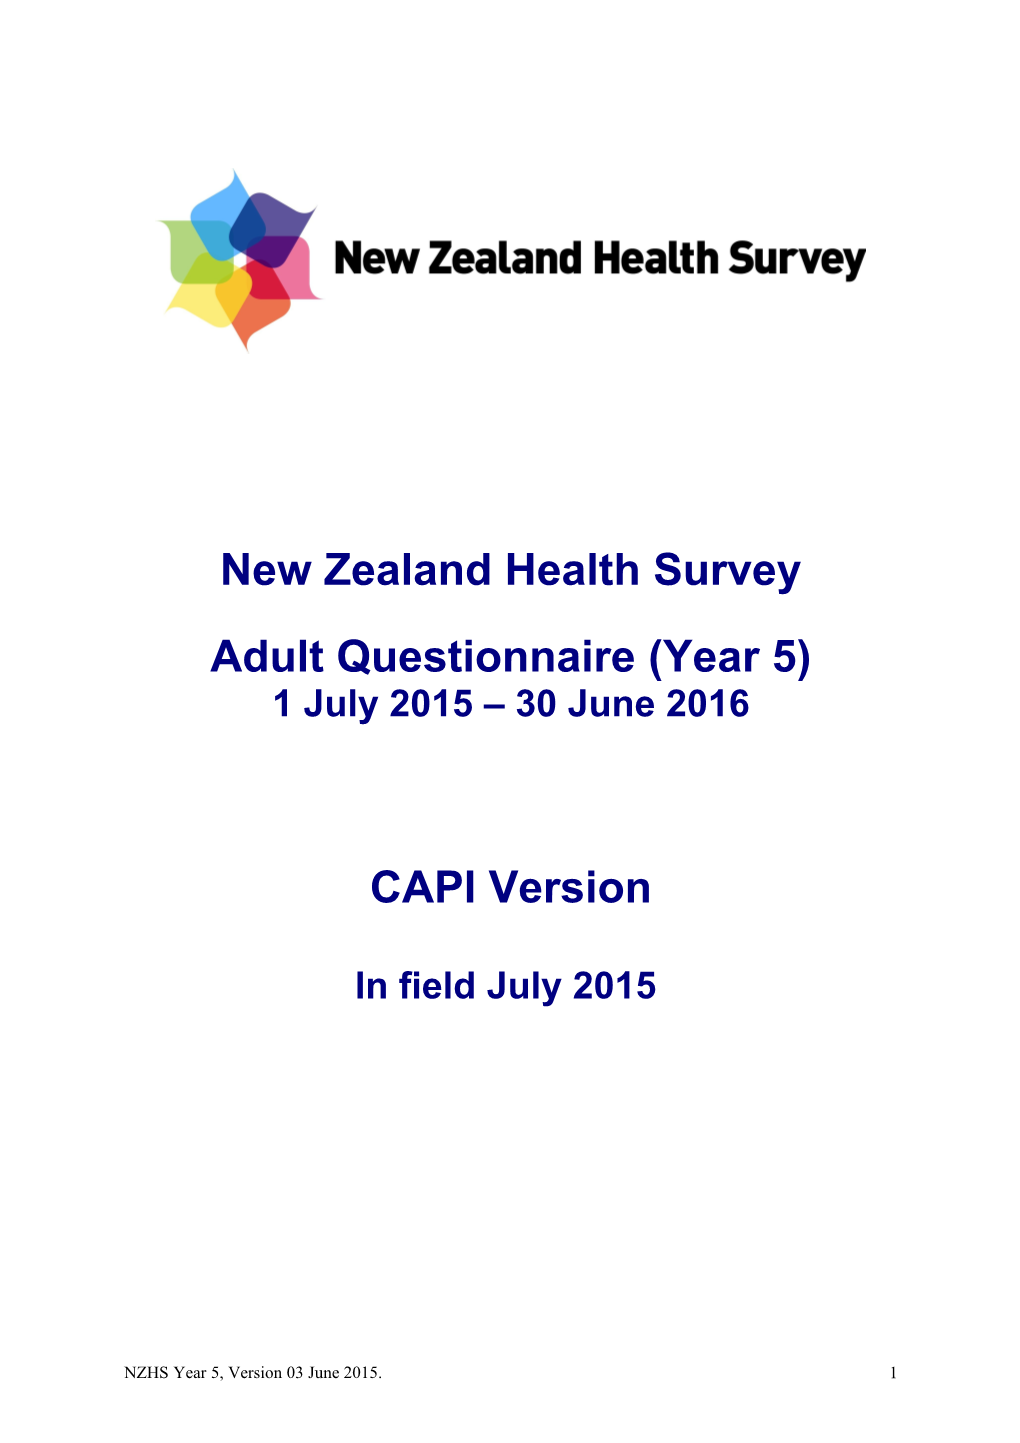 New Zealand Health Survey Adult Questionnaire (Year 5) 1 July 2015 30 June 2016